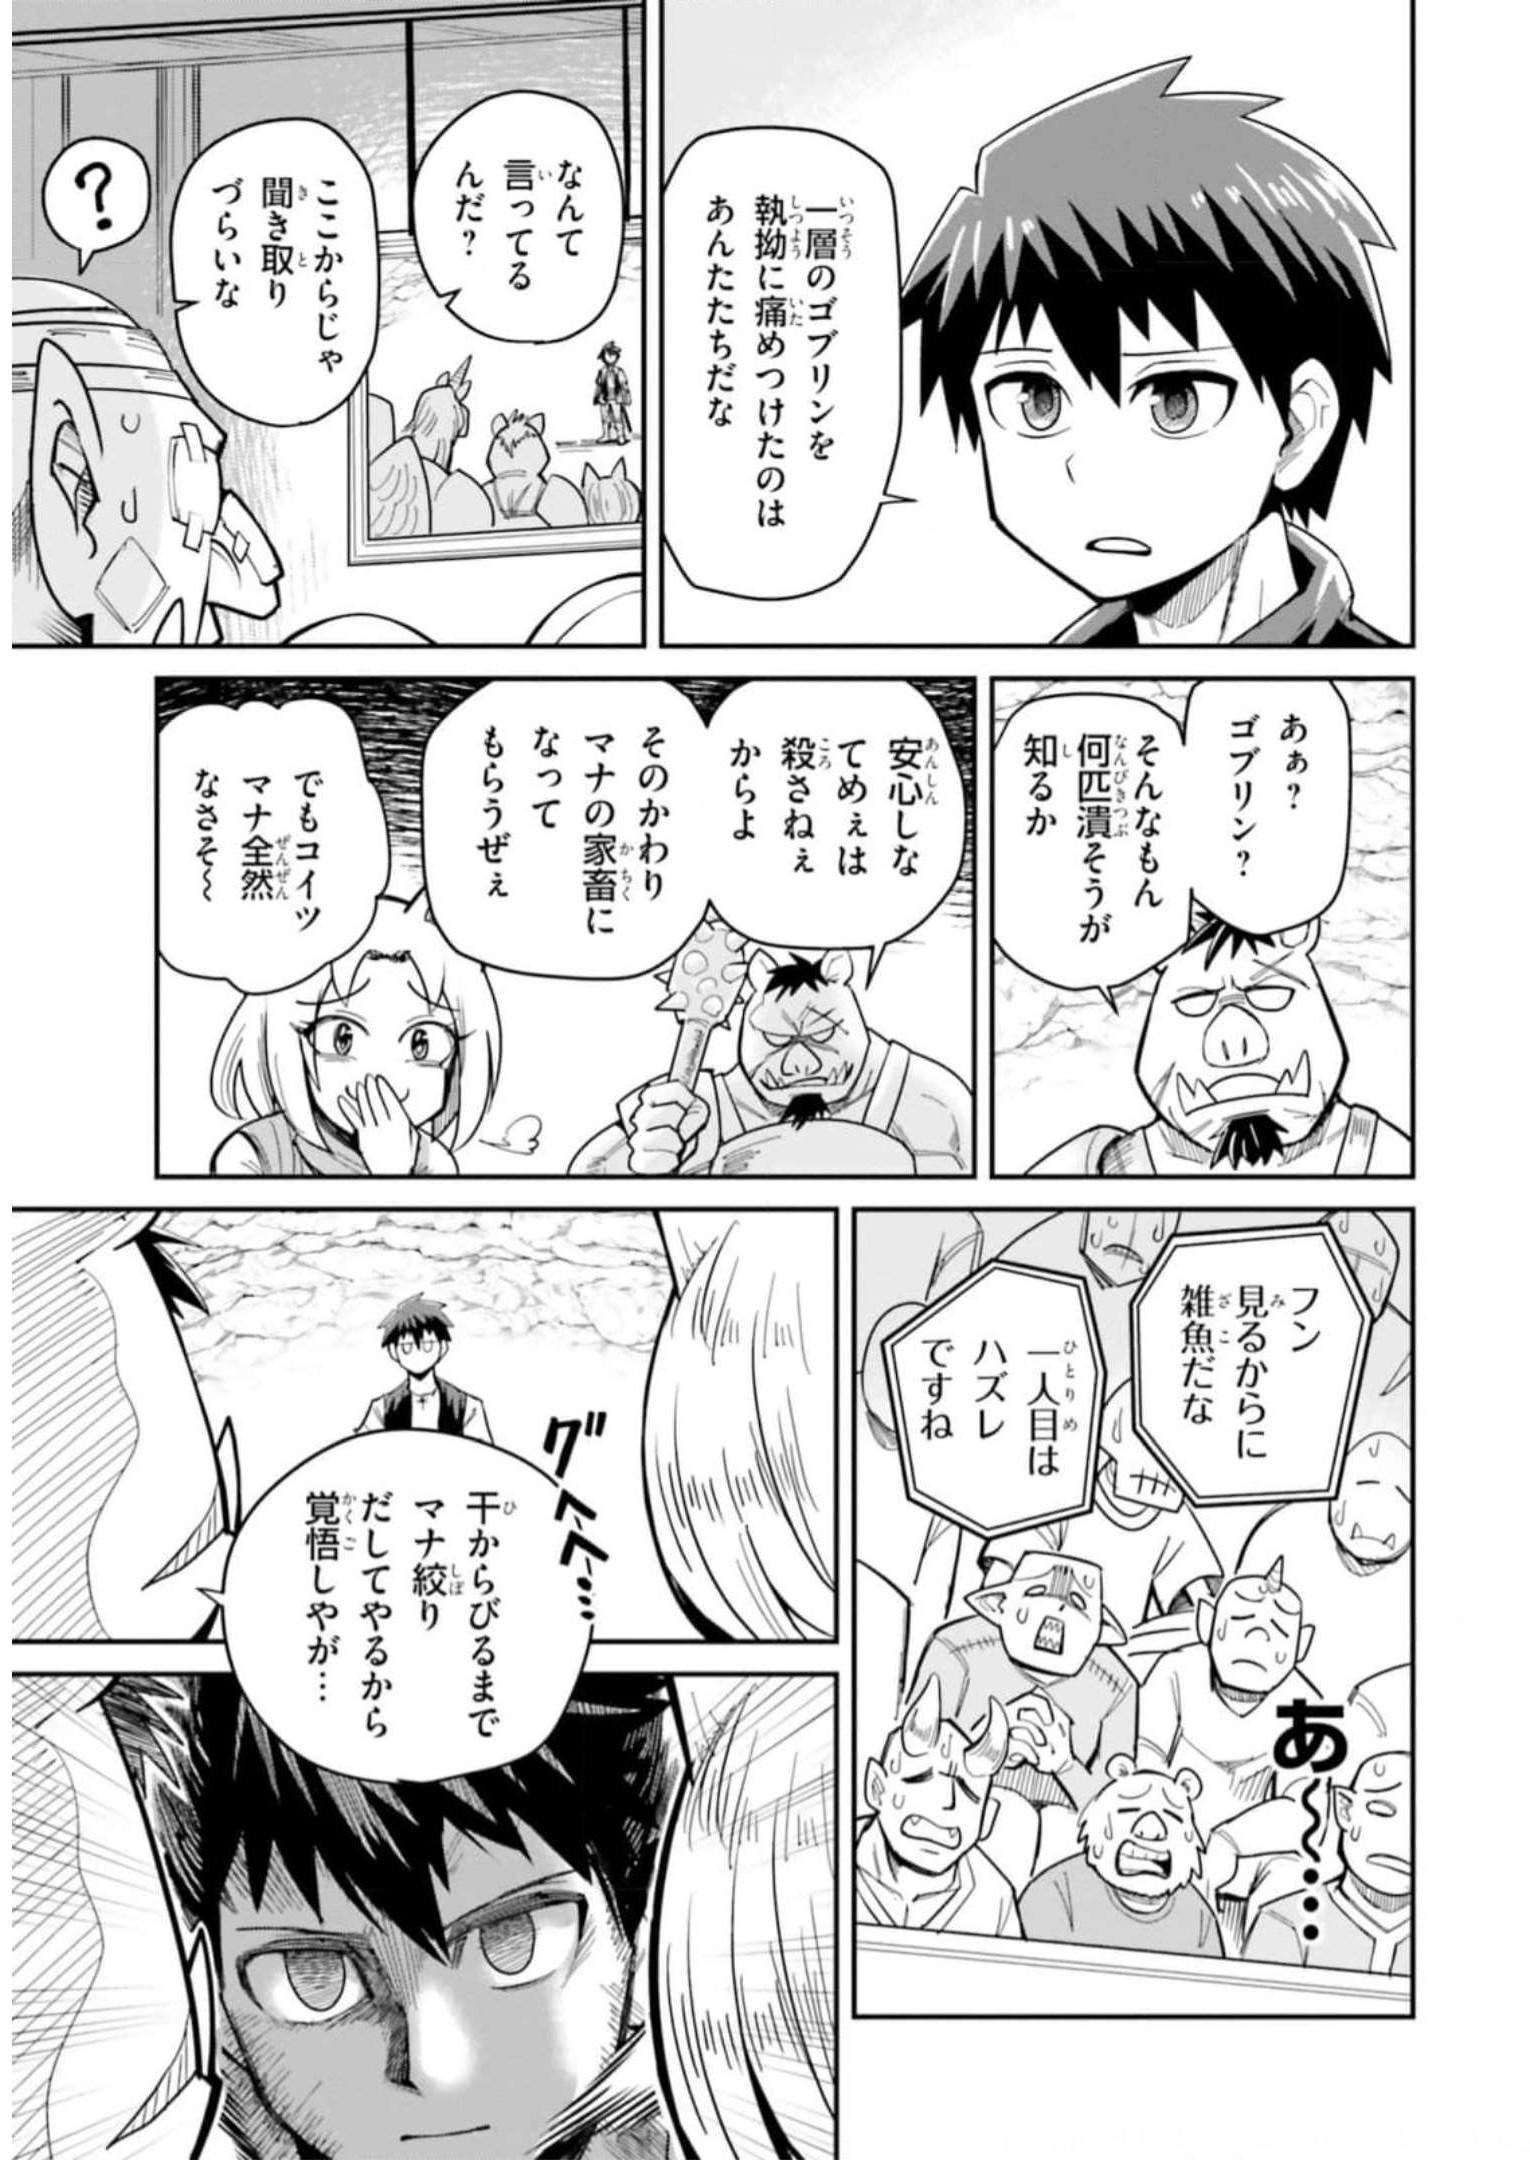 Dungeon Friends Forever Dungeon's Childhood Friend ダンジョンの幼なじみ 第20話 - Page 23